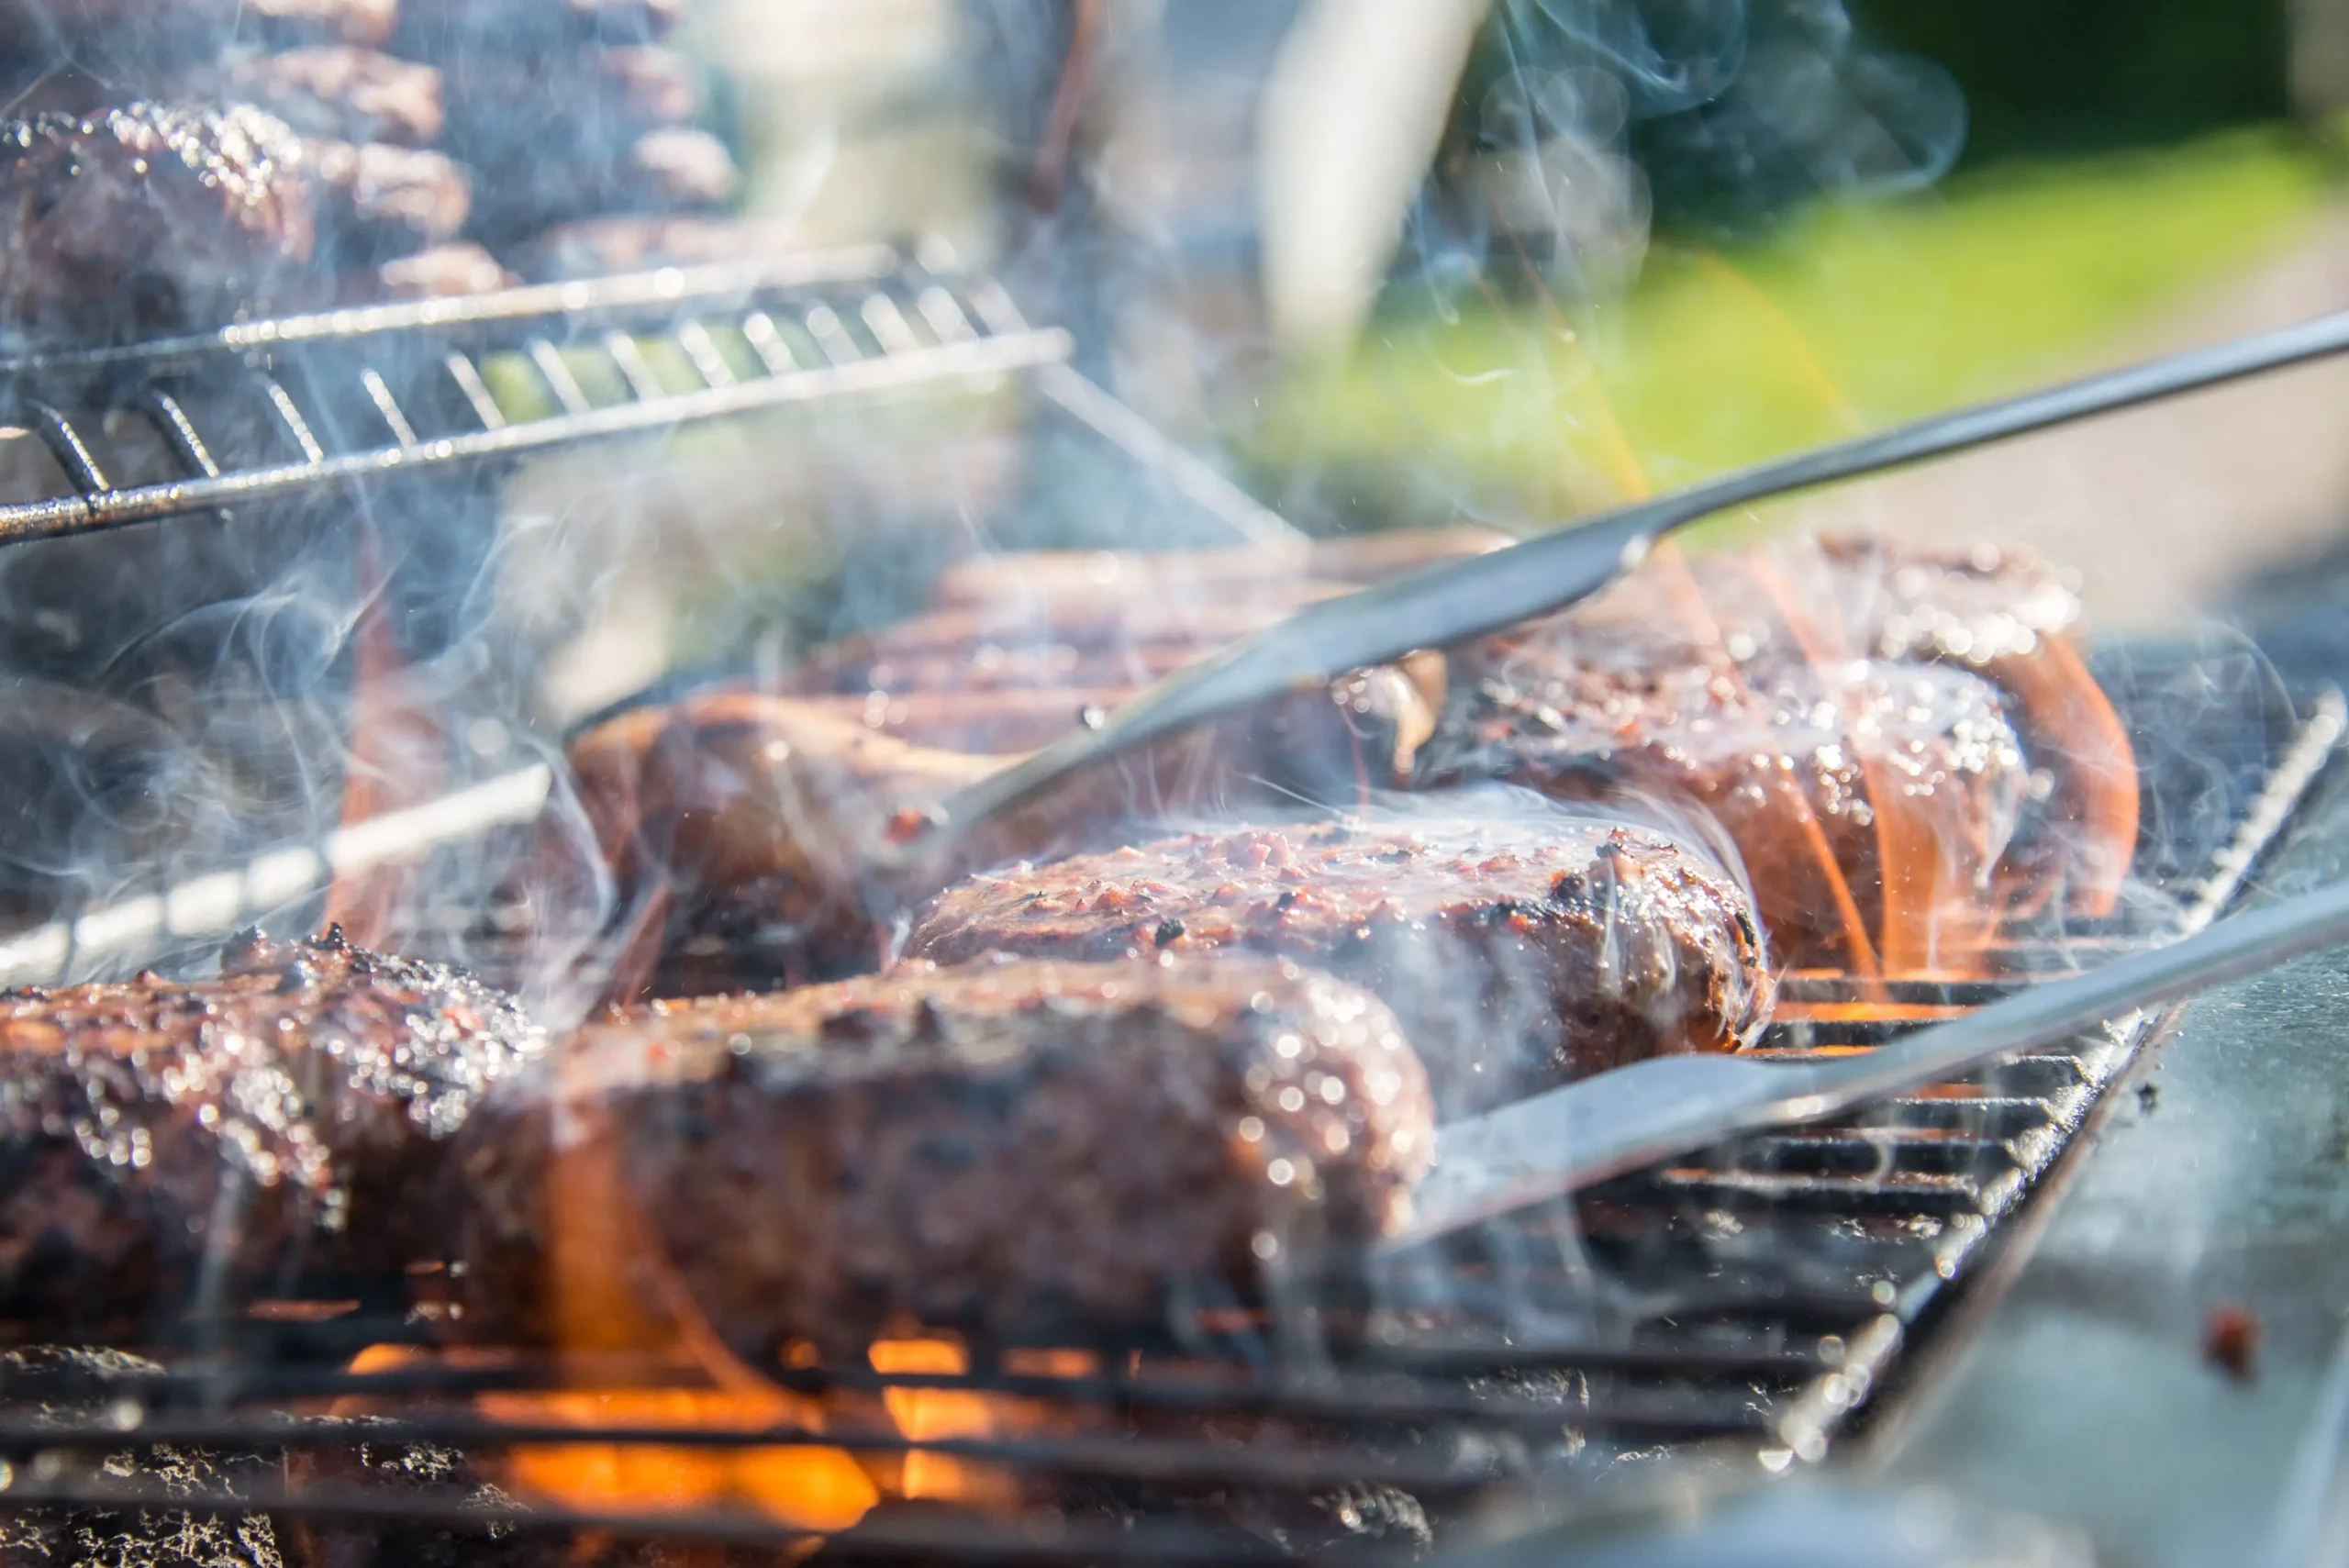 Looking to Master Your Grill Skills? Here are 5 Easy Tips to Follow